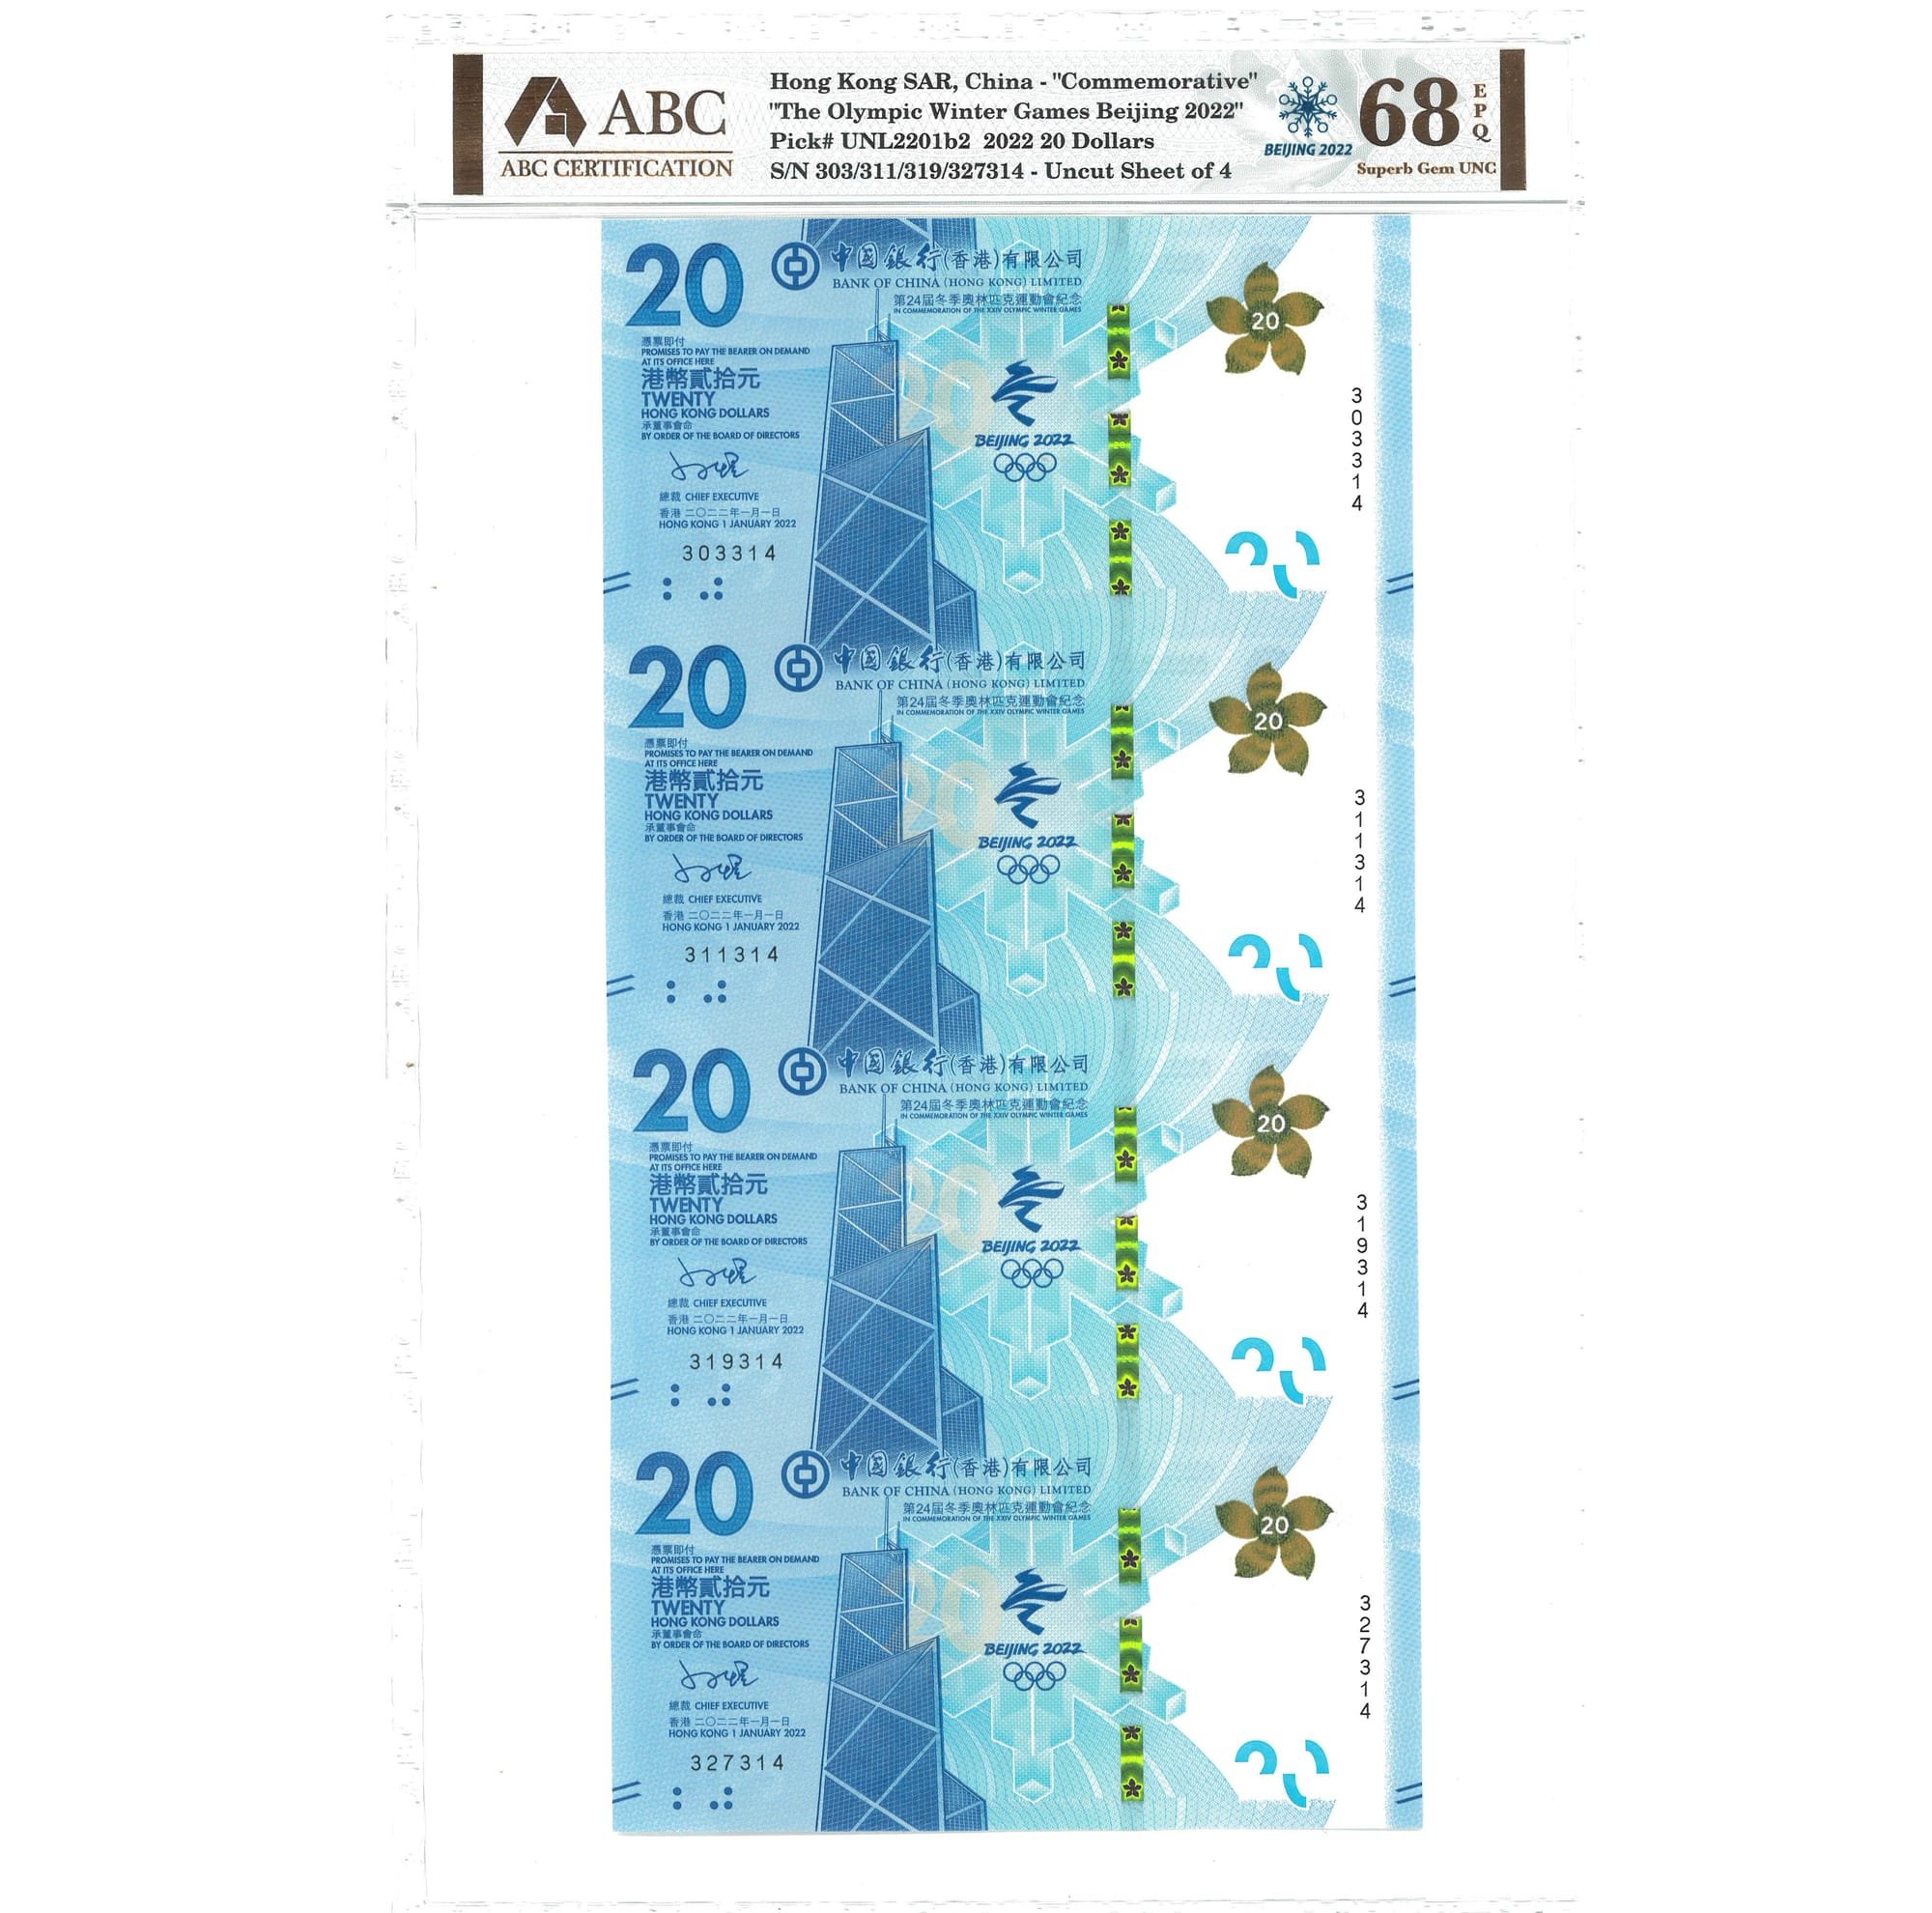 ABC Certification accepts uncut banknotes for grading service